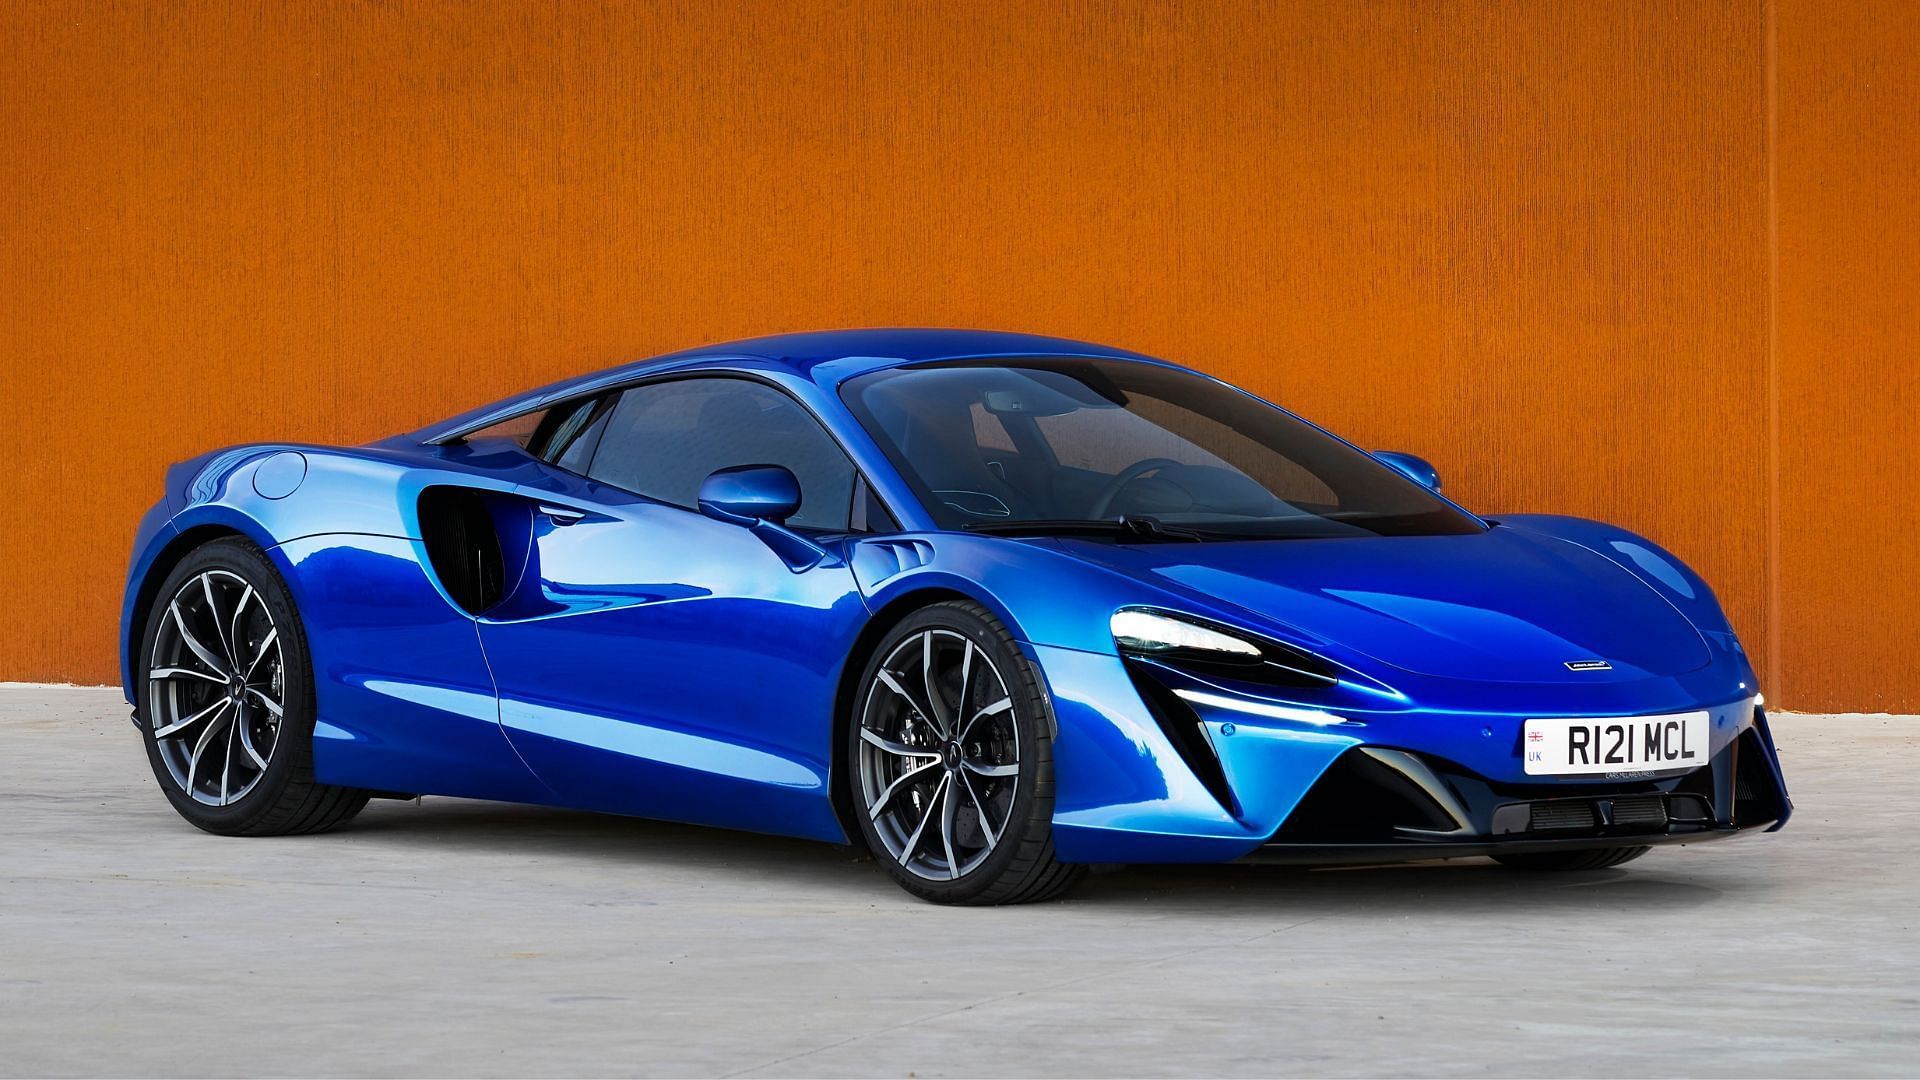 There are some similarities with the Itali GTB Custom (Image via McLaren)